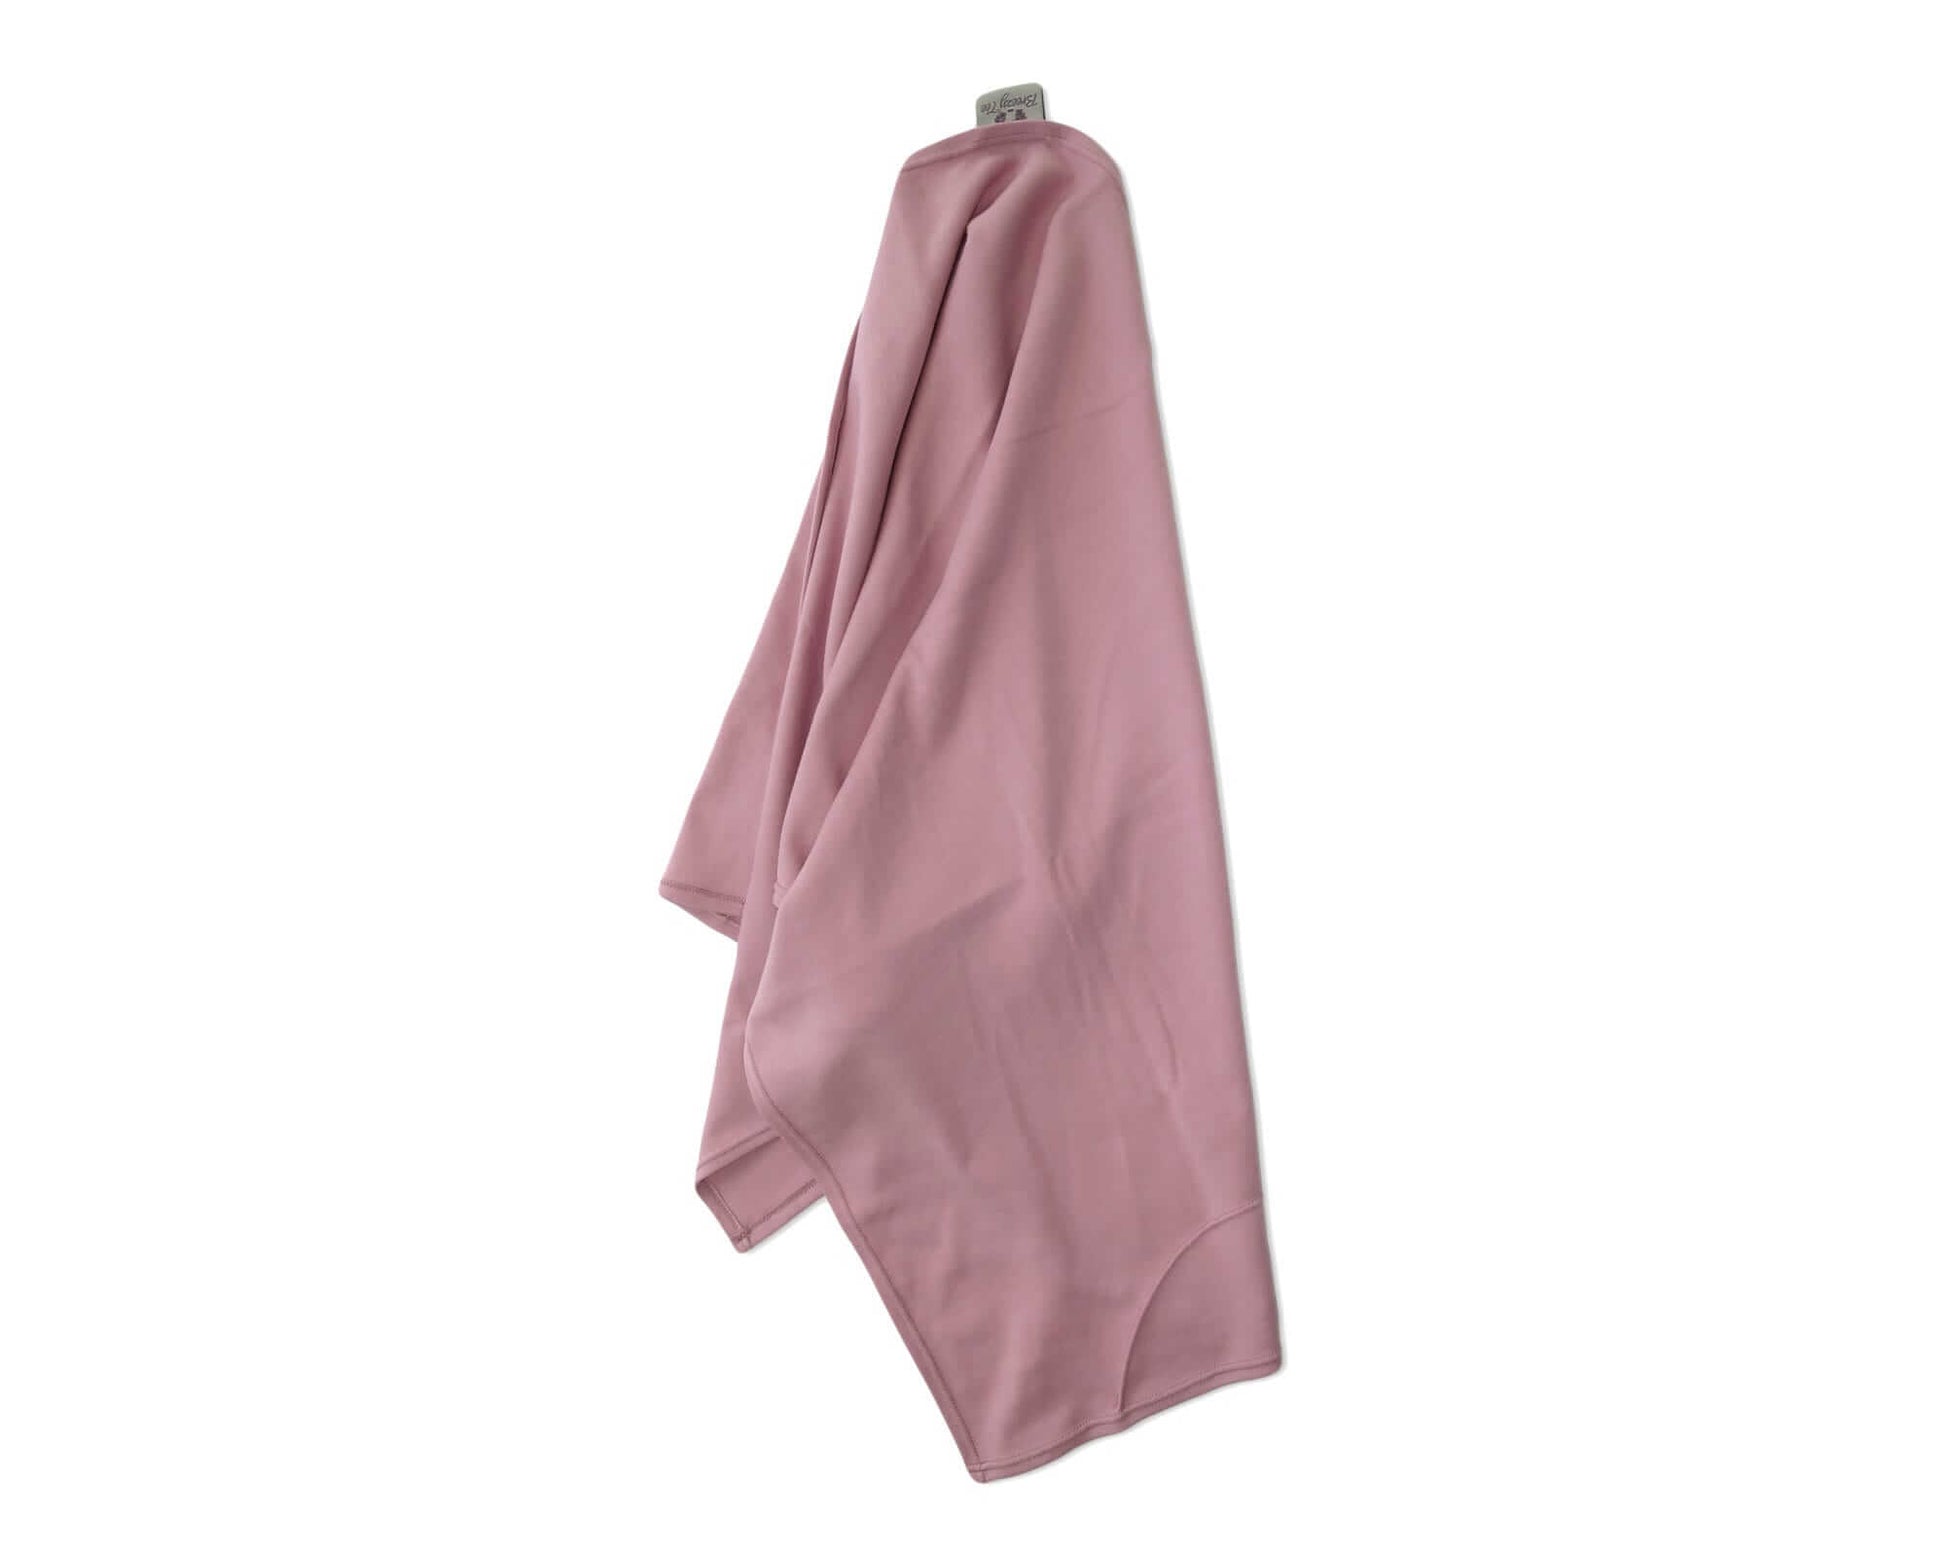 Rose Berry T-Shirt Hair Towel for Curly, Wavy, and Straight Hair - Soft, Absorbent, and Eco-Friendly